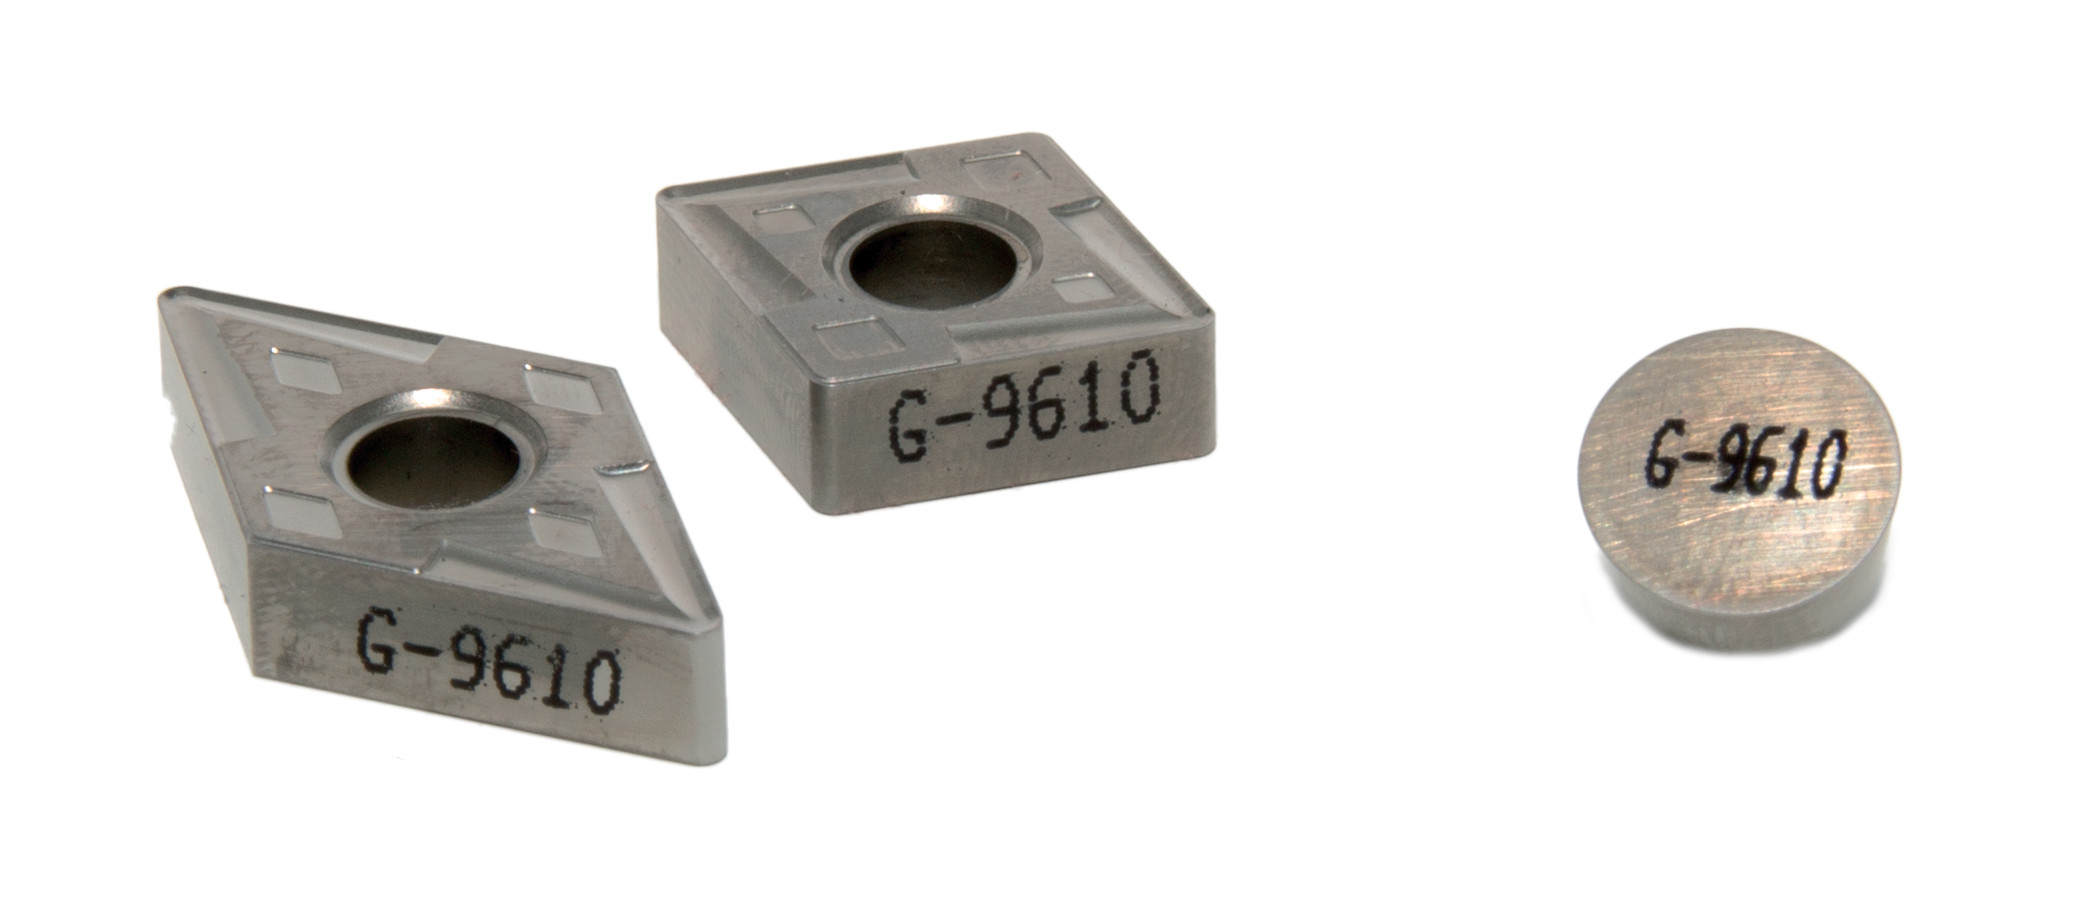 G-9610 inserts outside of Tool Holders